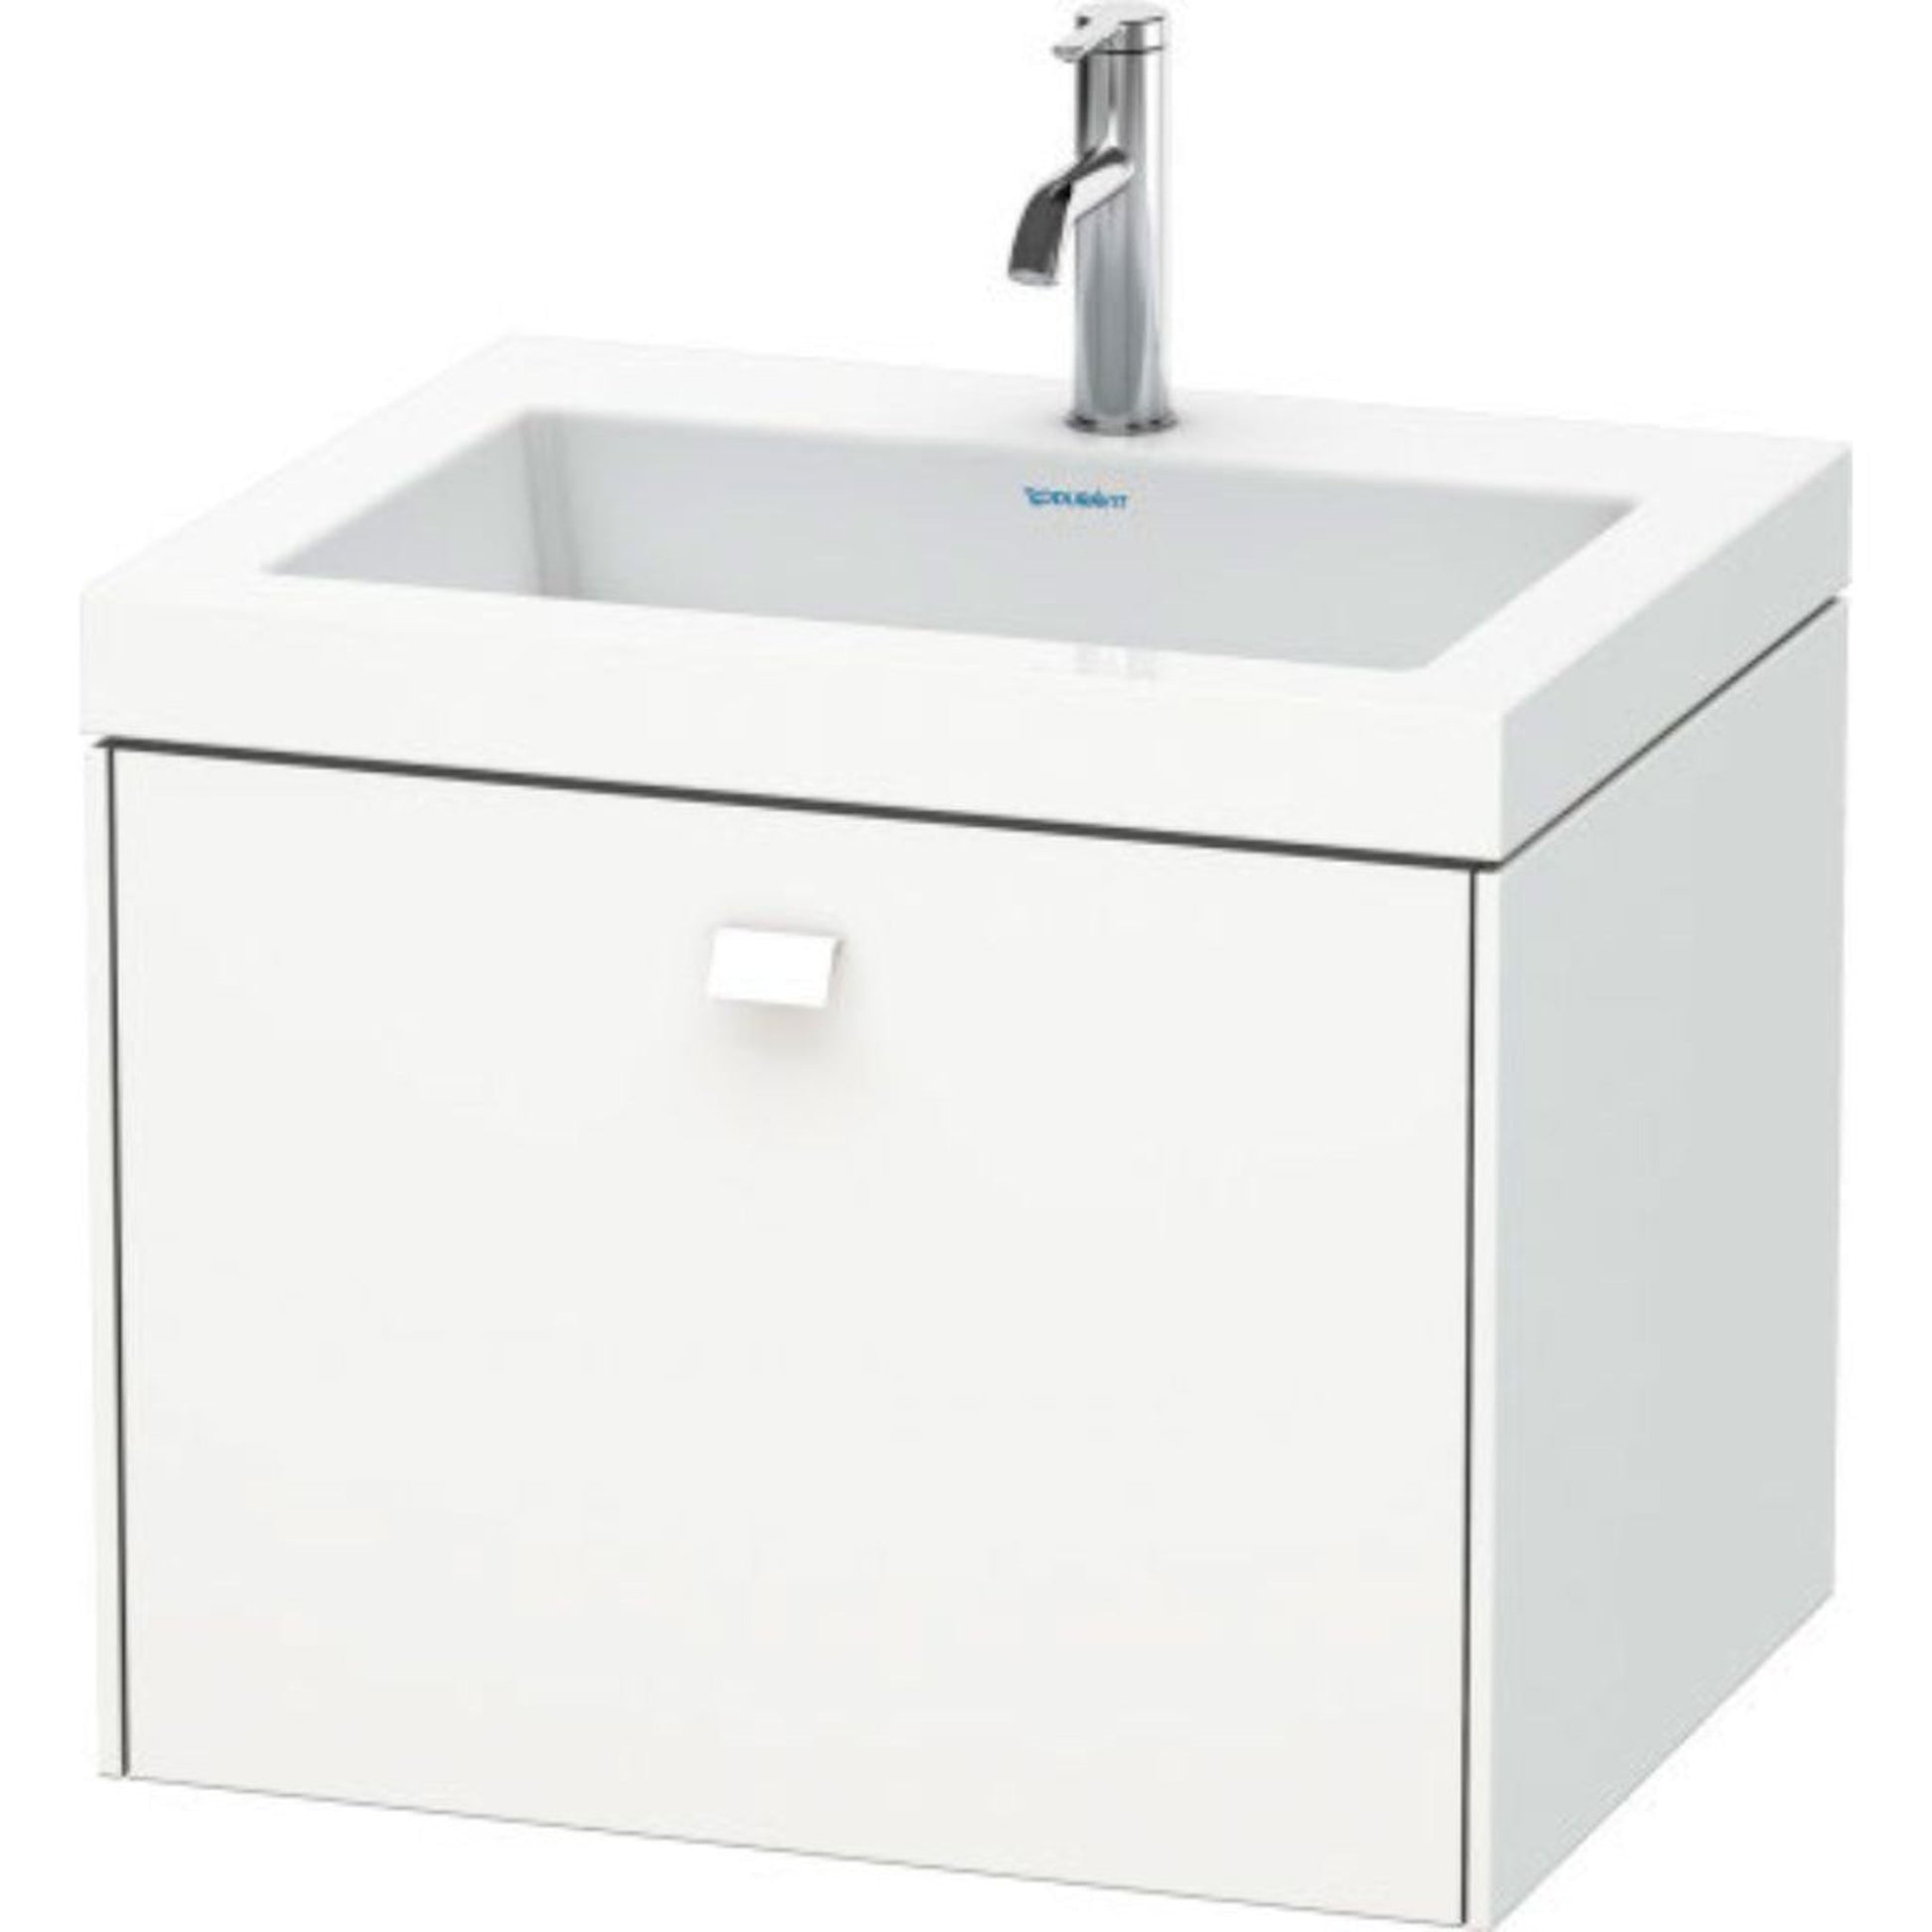 Duravit Brioso 24" x 20" x 19" One Drawer C-Bonded Wall-Mount Vanity Kit With One Tap Hole in White Matt